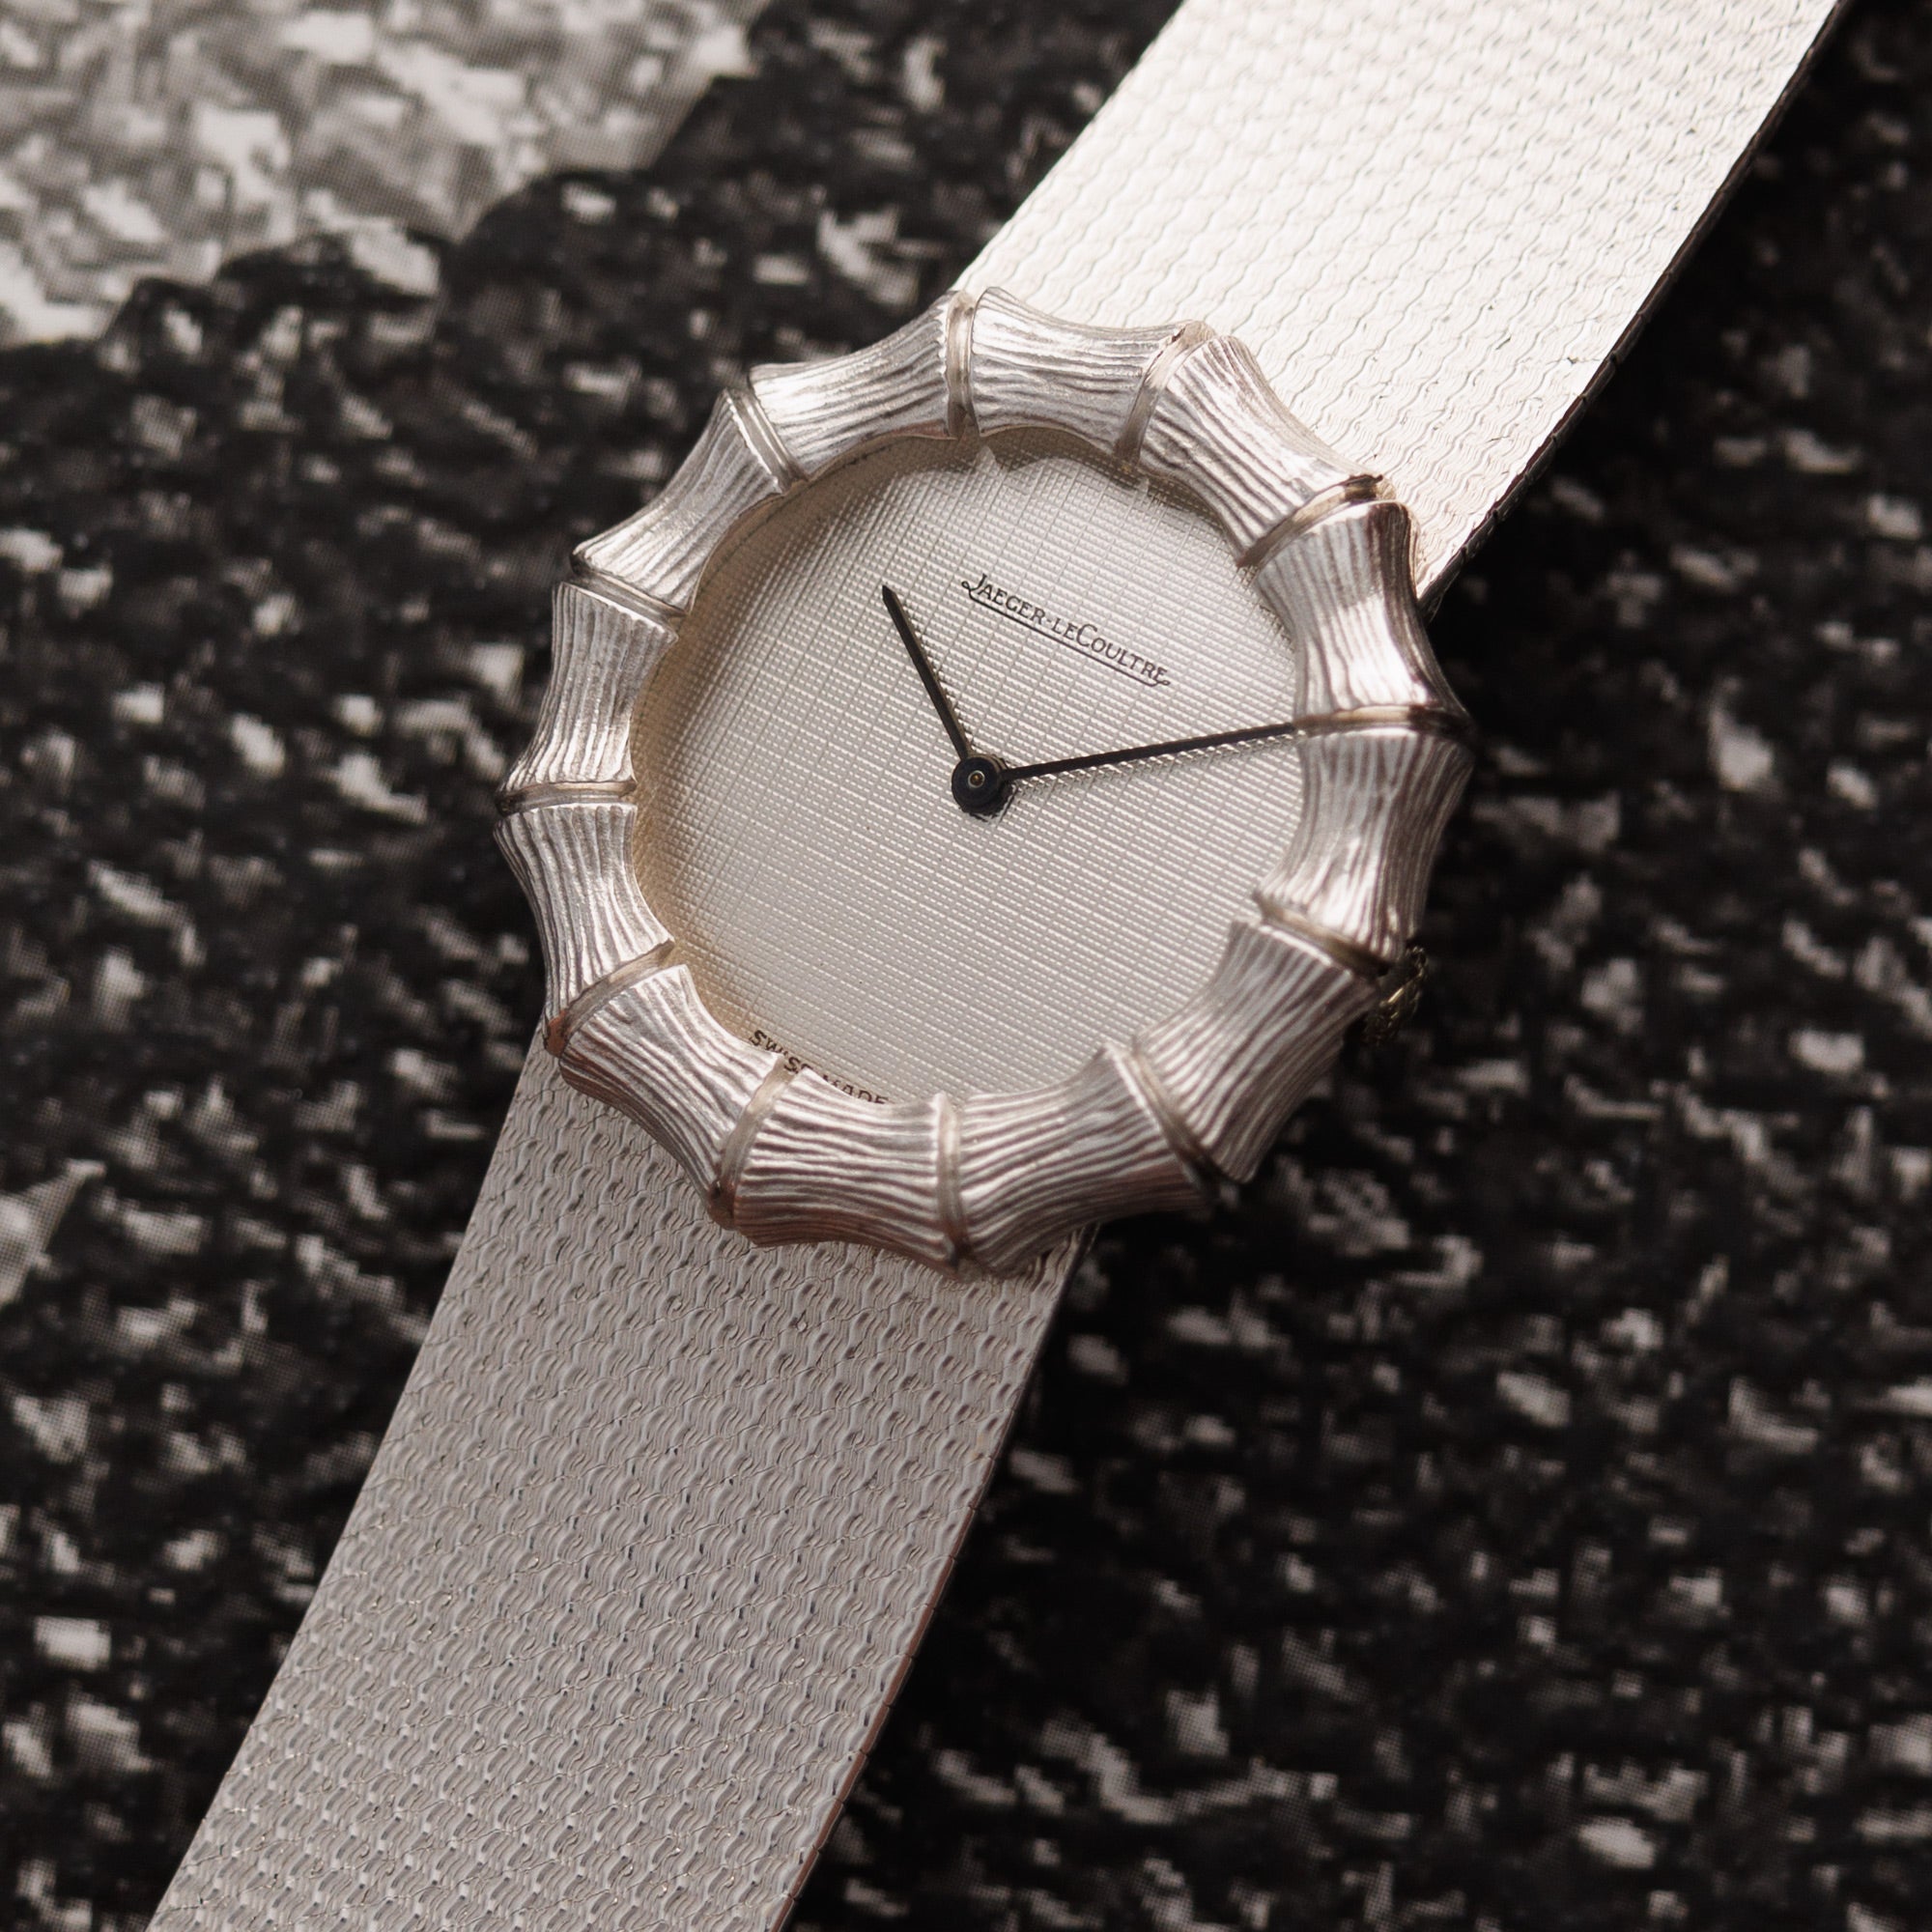 Jaeger LeCoultre - Jaeger Lecoultre White Gold Bamboo Watch - The Keystone Watches